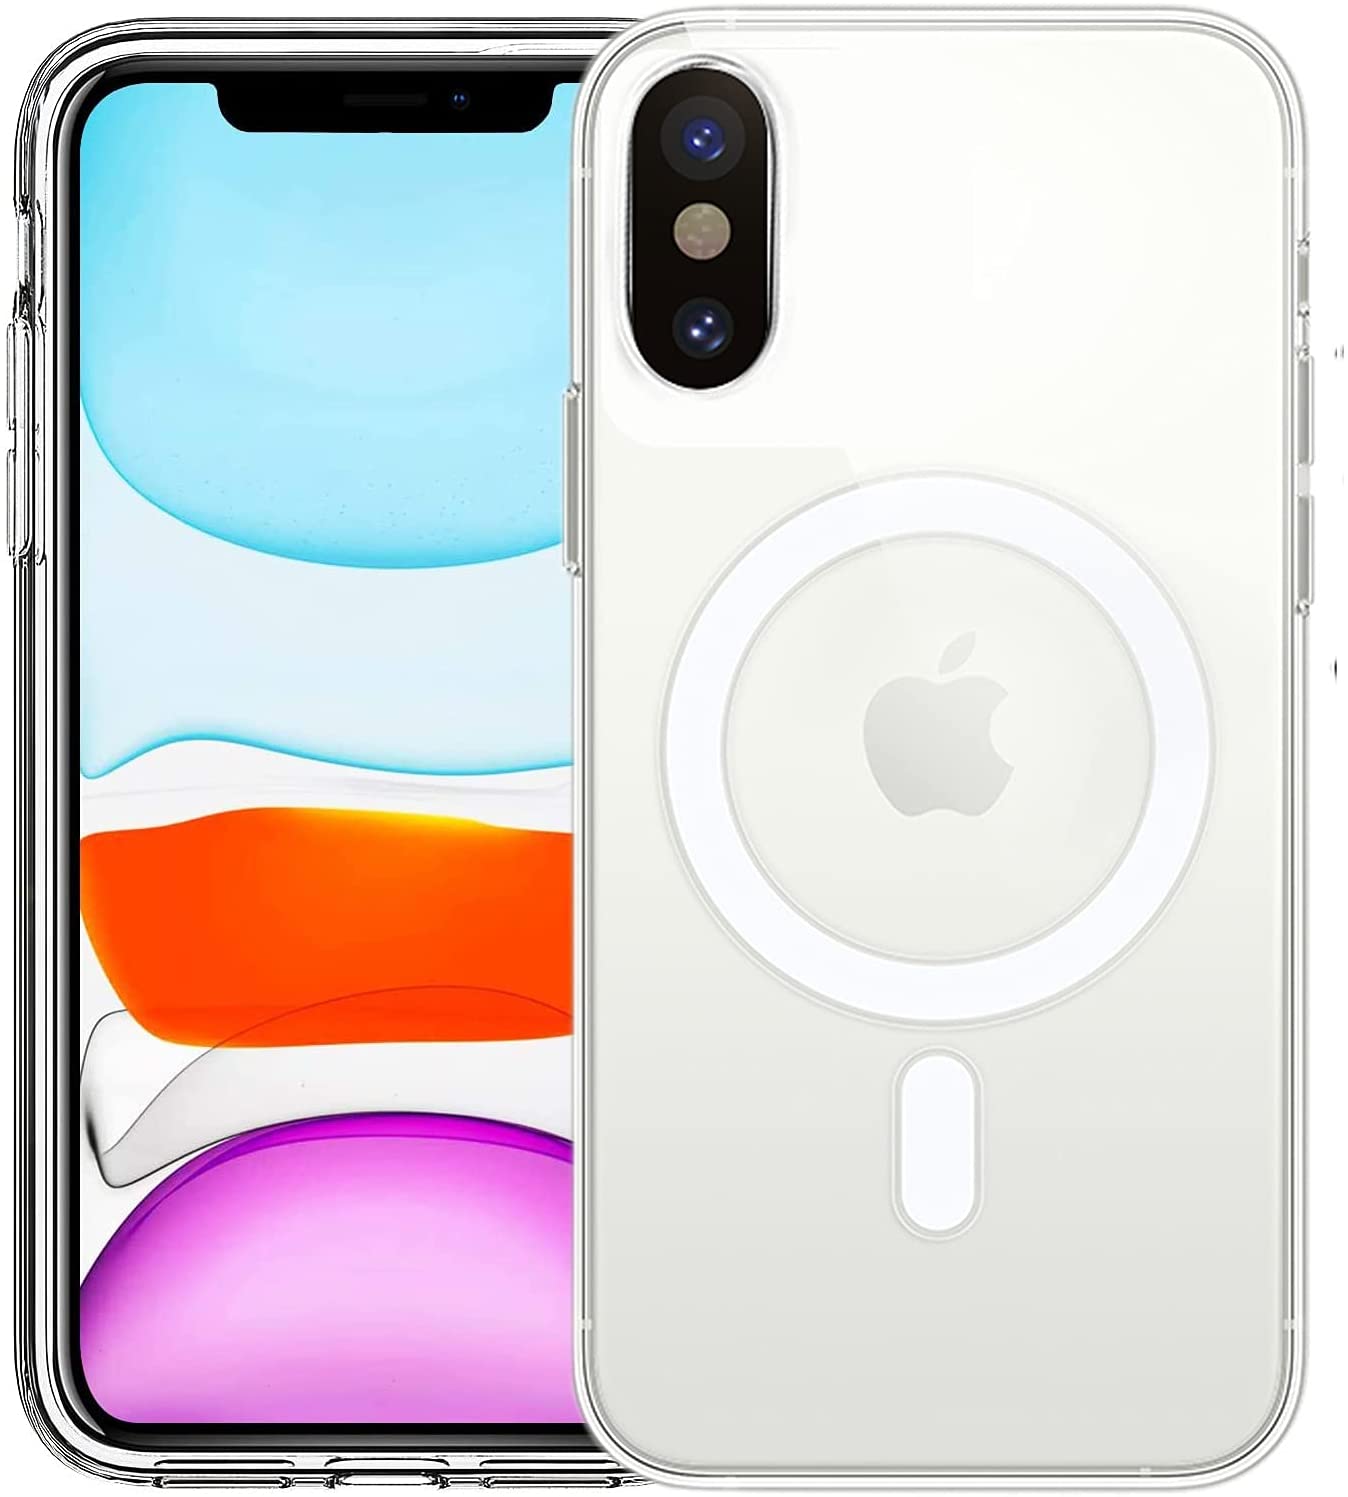 HVDI Clear Magnetic Case for iPhone X/Xs with Mag-Safe Wireless Charging, Soft Silicone TPU Bumper Cover, Thin Slim Fit Hard Back Shockproof Anti-Yellow Protective Case for iPhone Xs/X(5.8 inch)